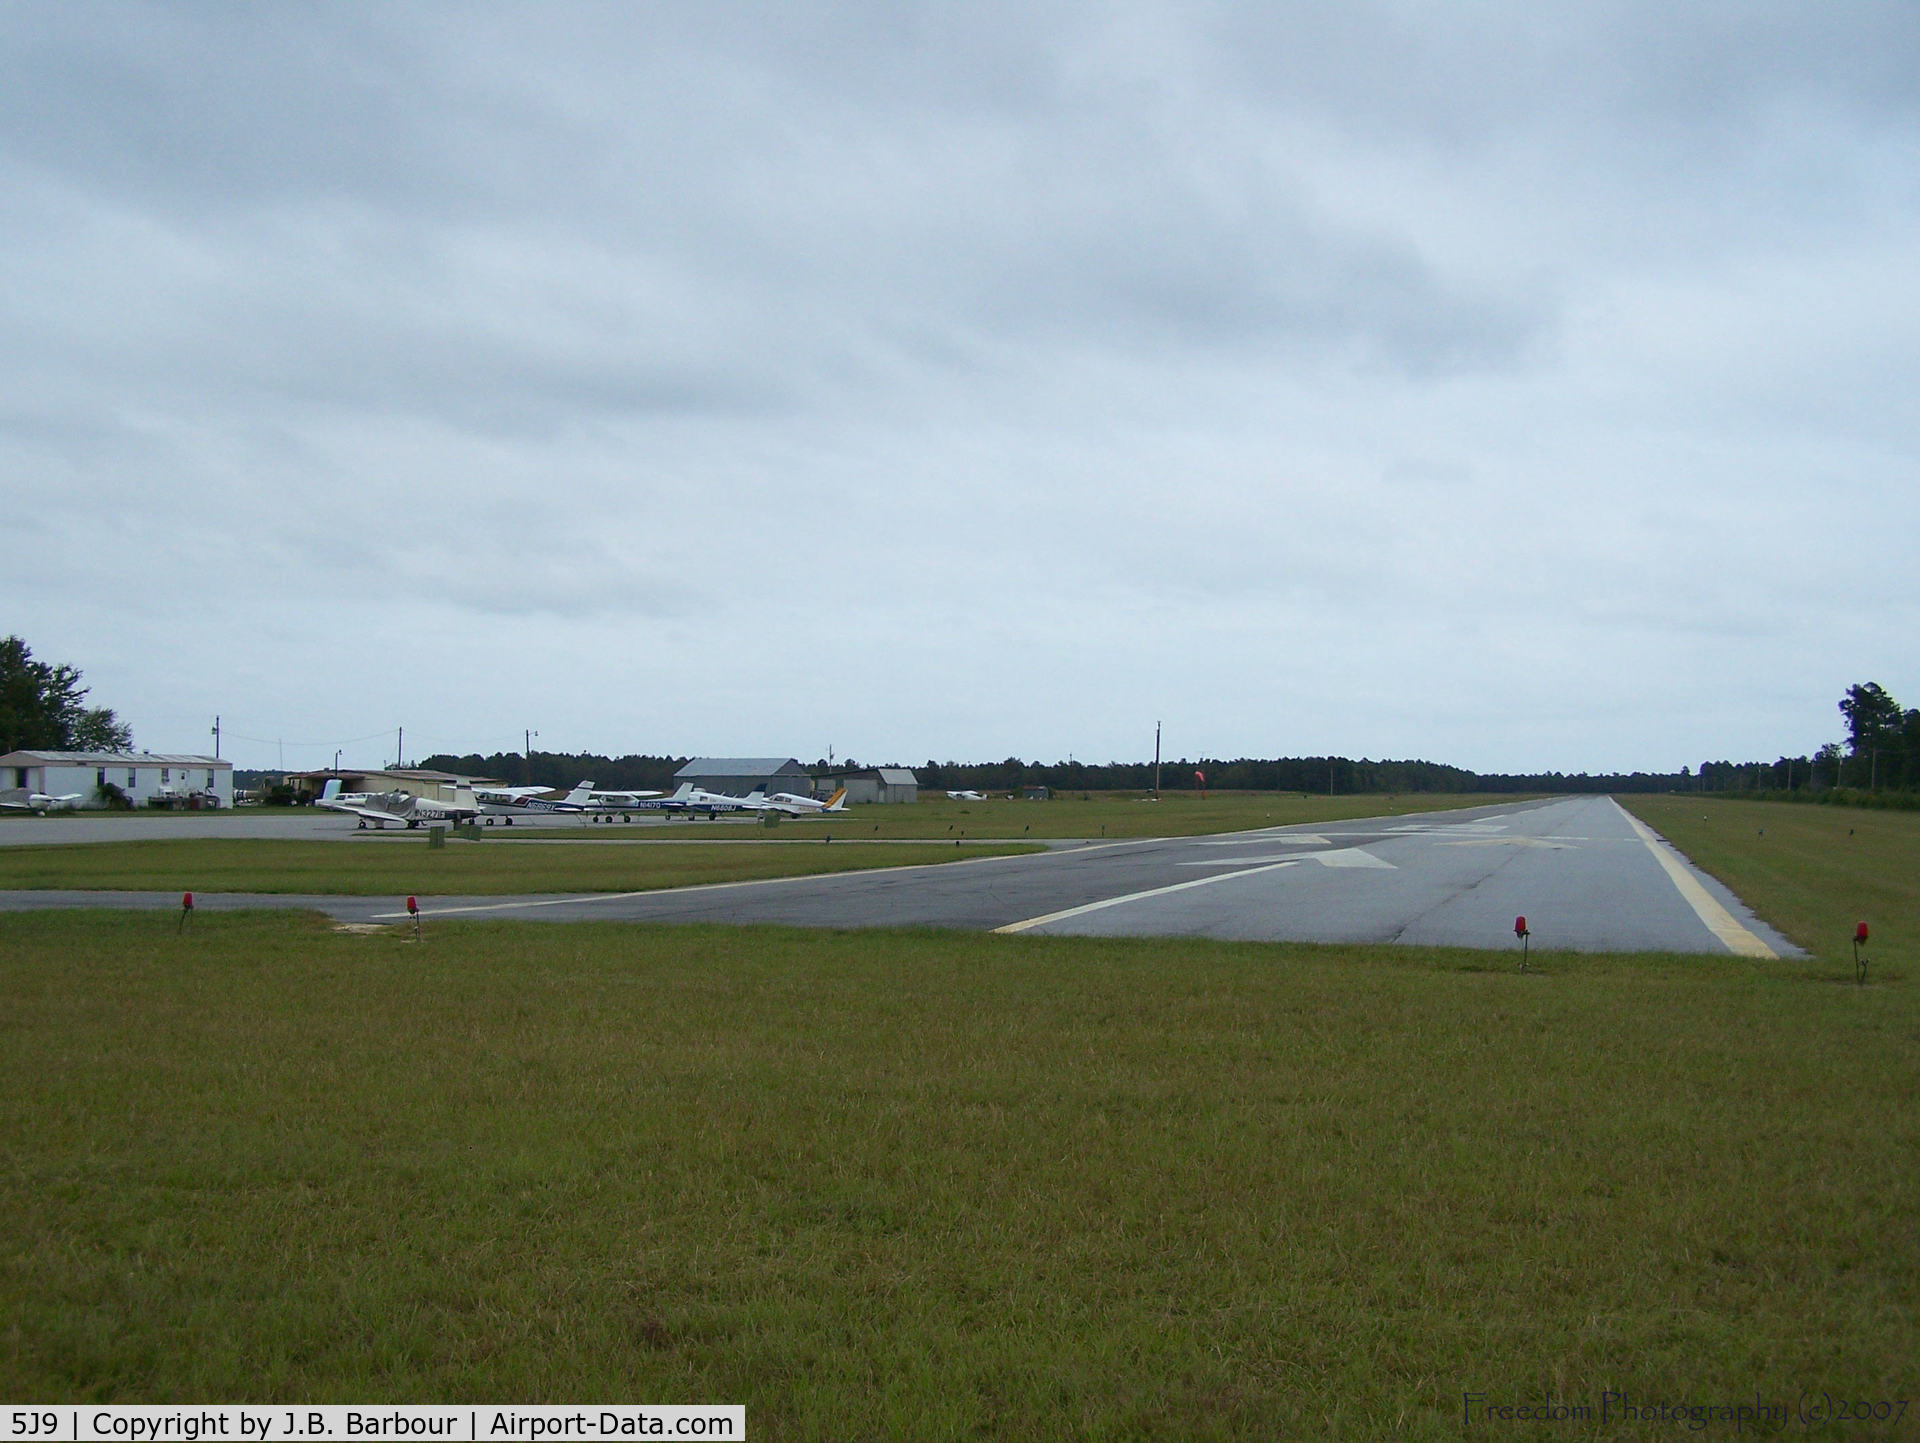 Twin City Airport (5J9) - A somewhat dated location